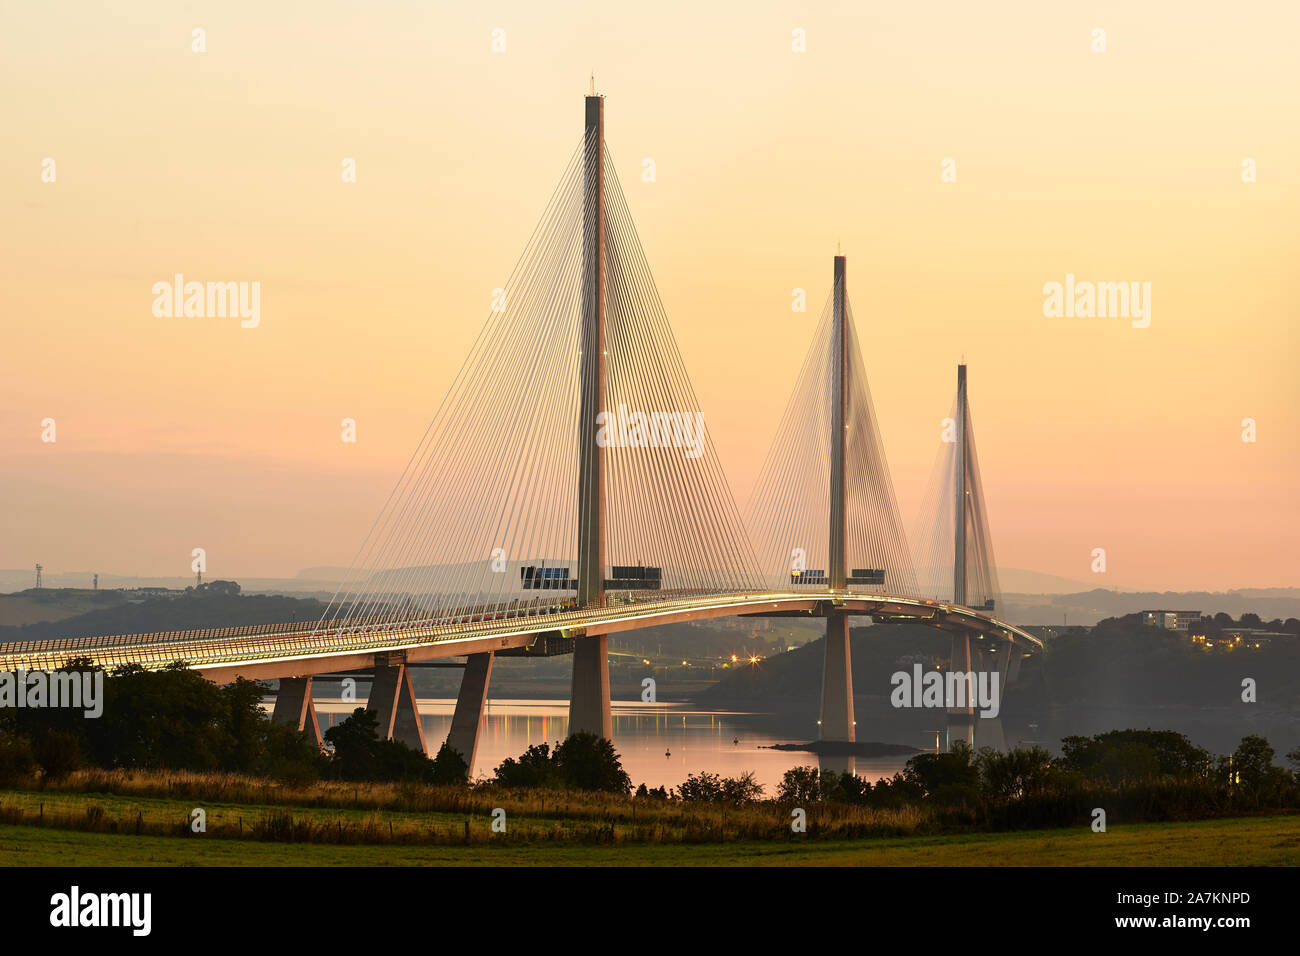 Queensferry crossing across the Firth of Forth at South Queensferry, Edinburgh, Scotland at sunrise Stock Photo